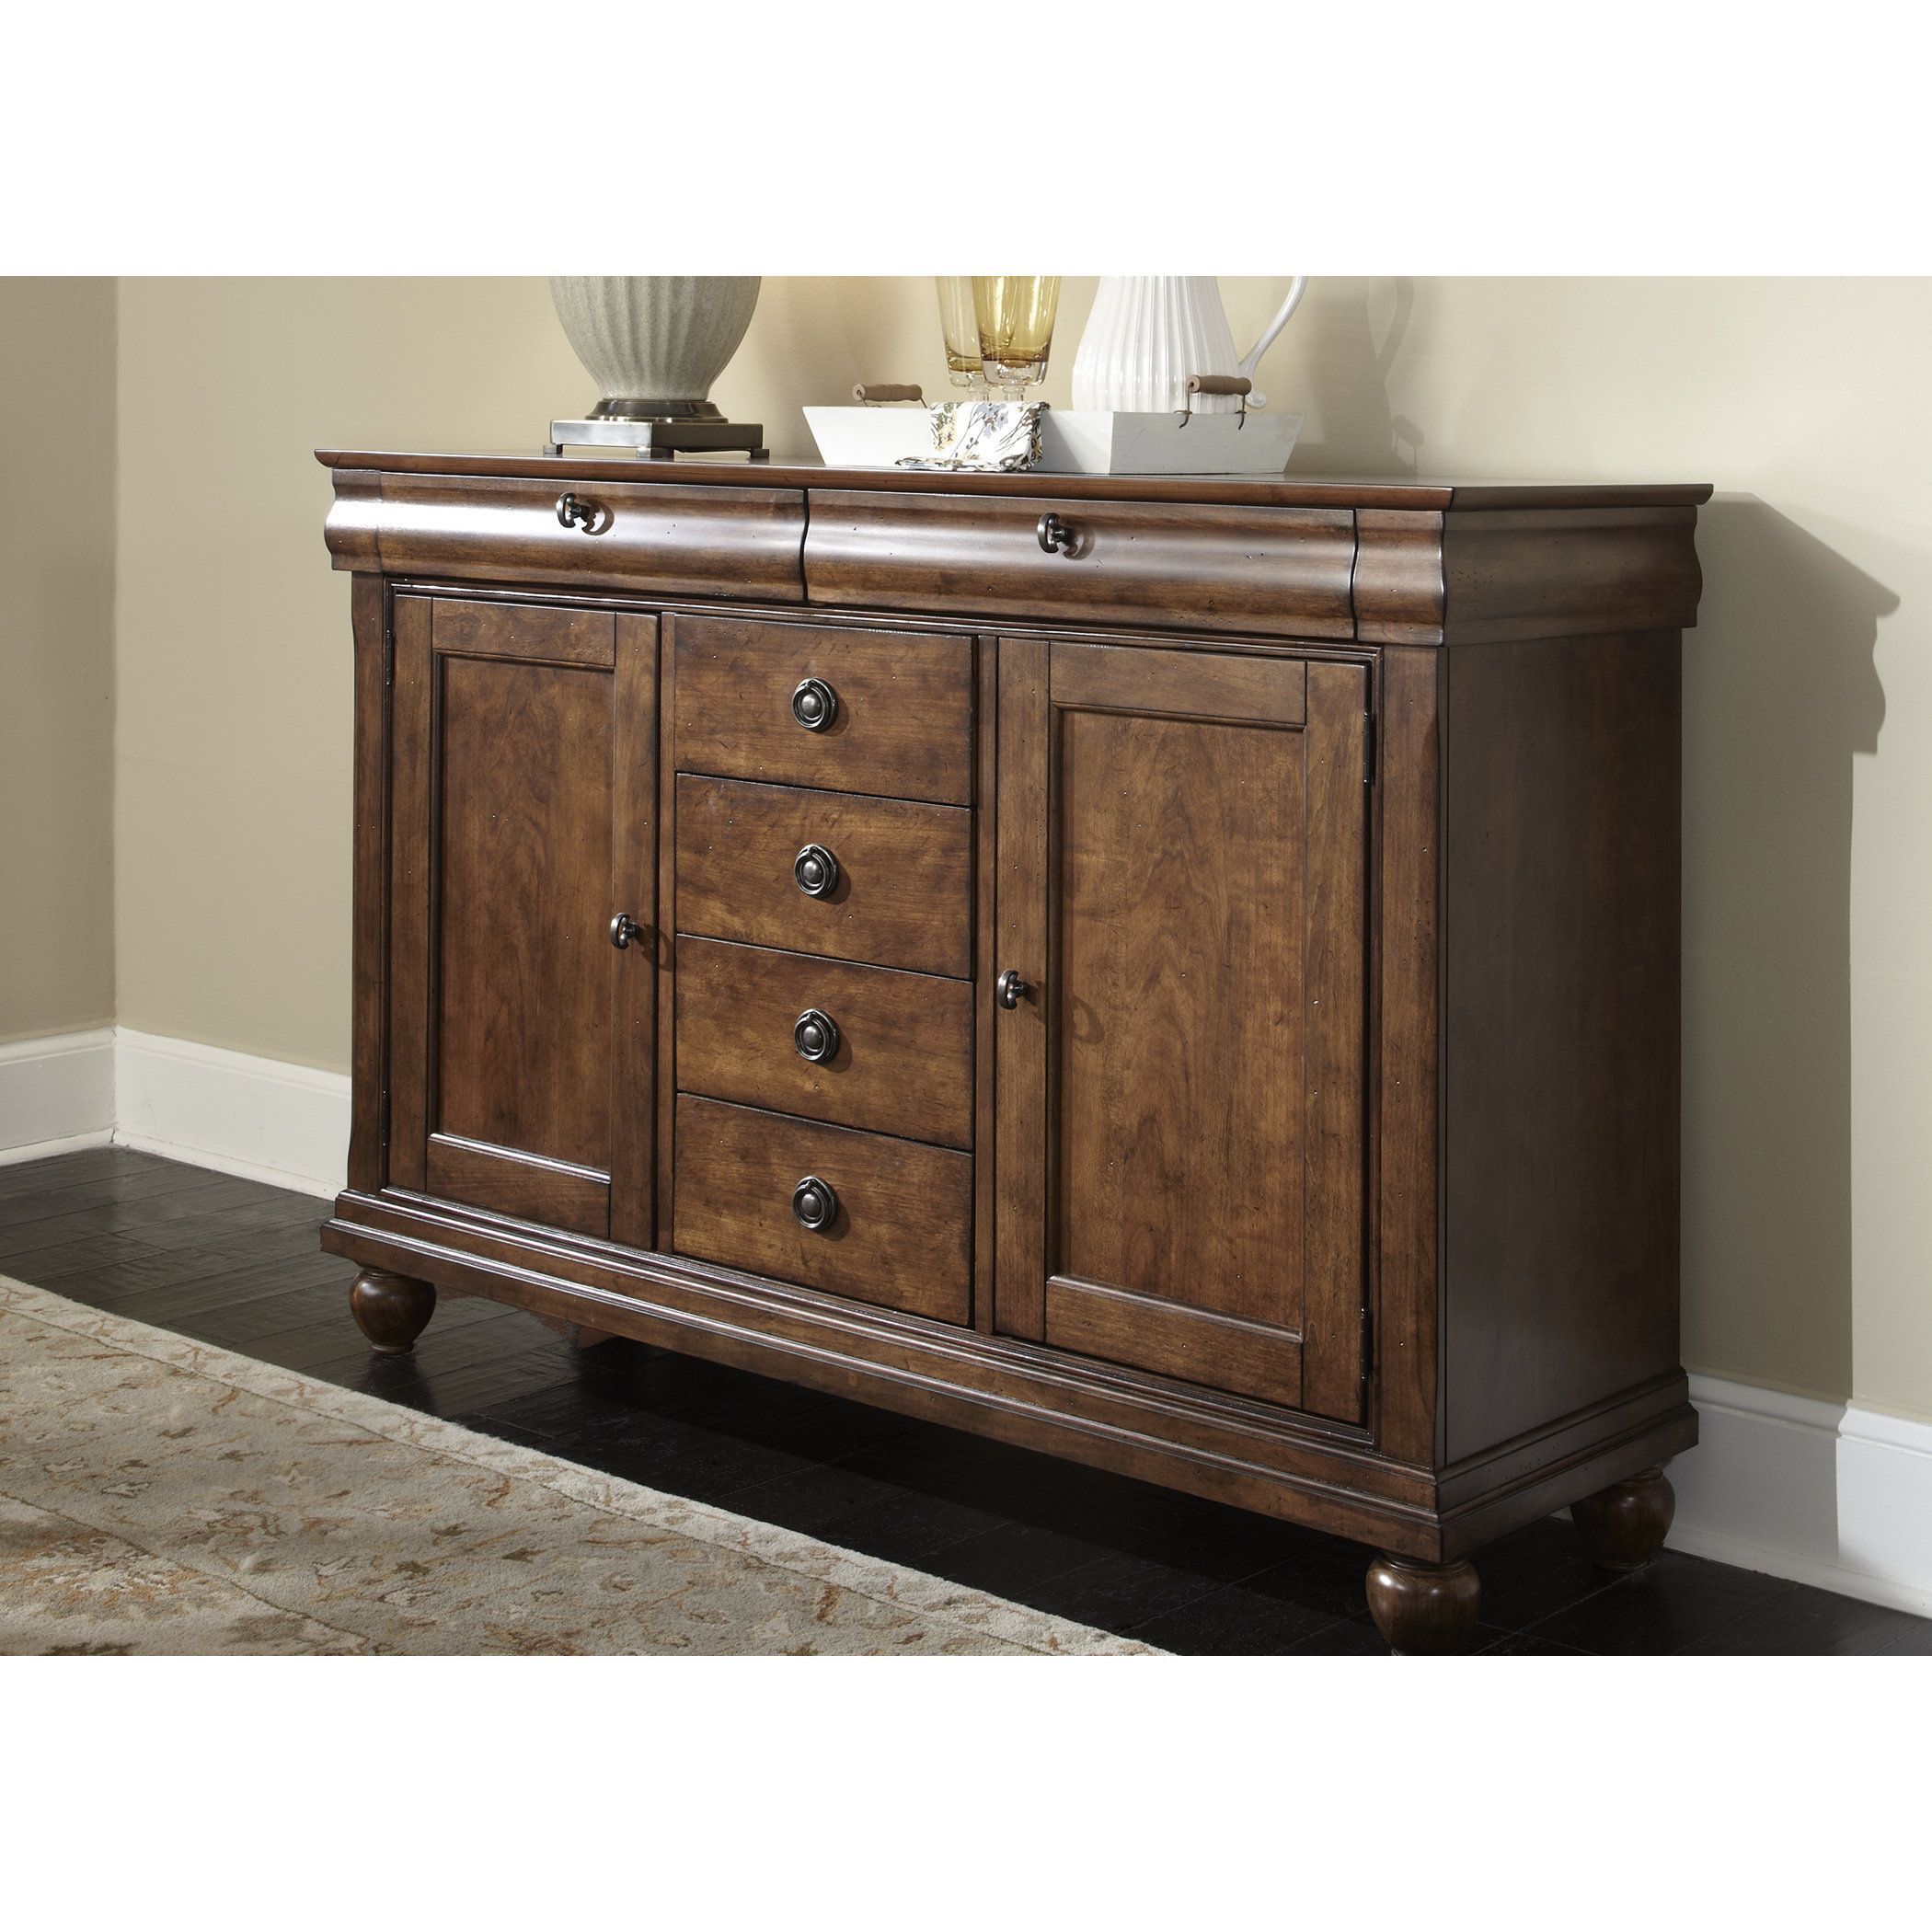 Liberty Rustic Tradition Cherry Server, Brown | Products Pertaining To Most Recent Chalus Sideboards (View 11 of 20)